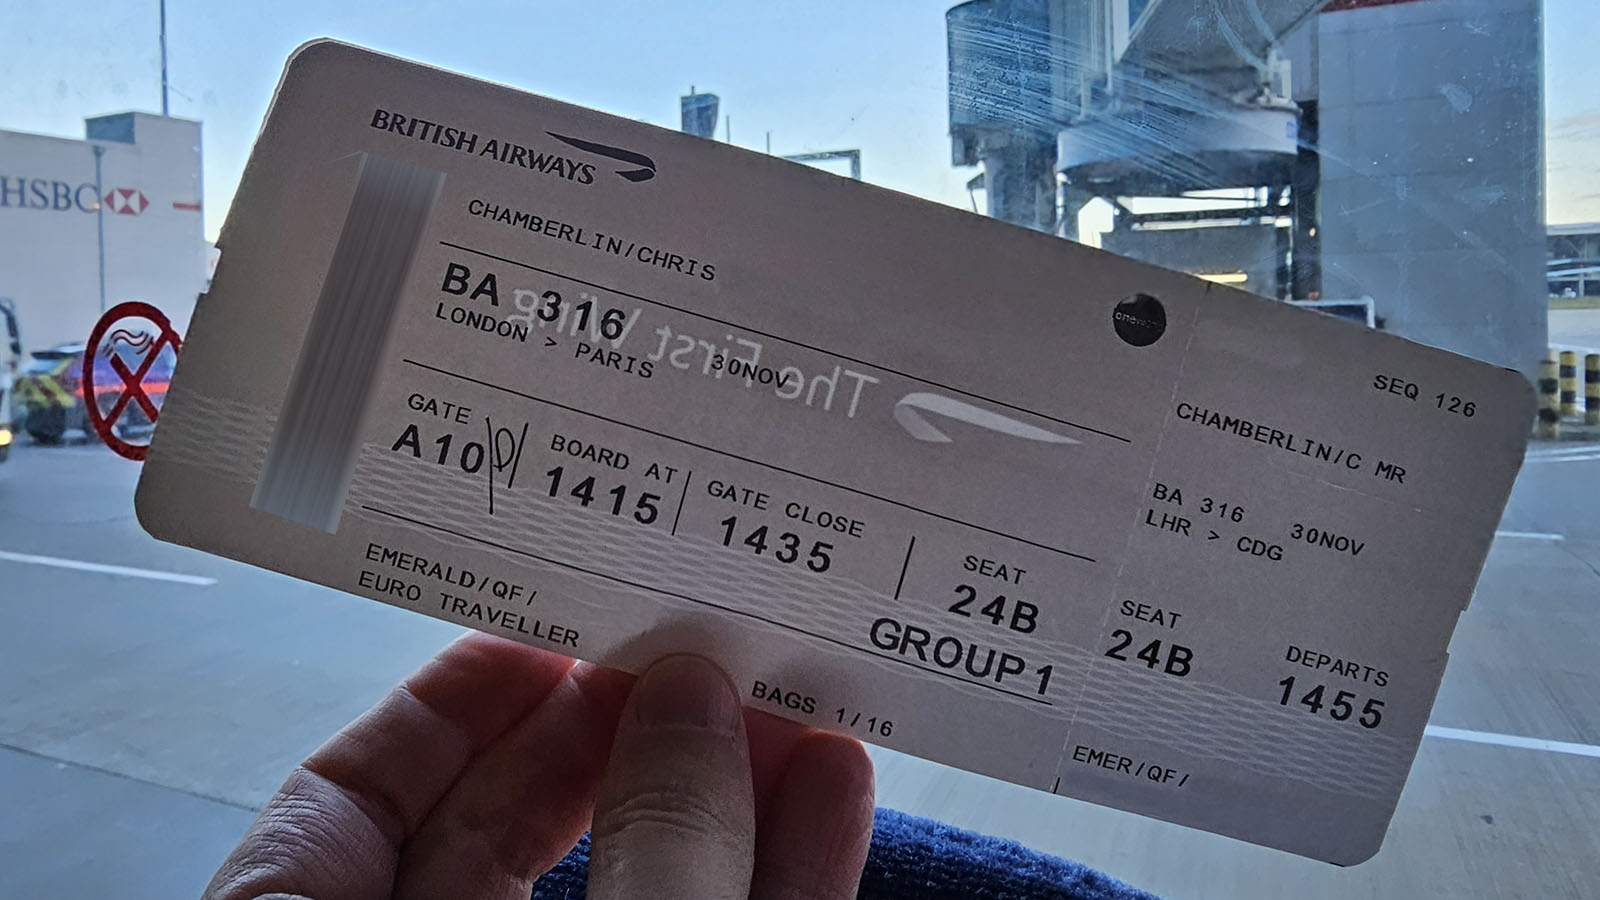 Using oneworld priority standby to get a last-minute seat on a sold-out flight.